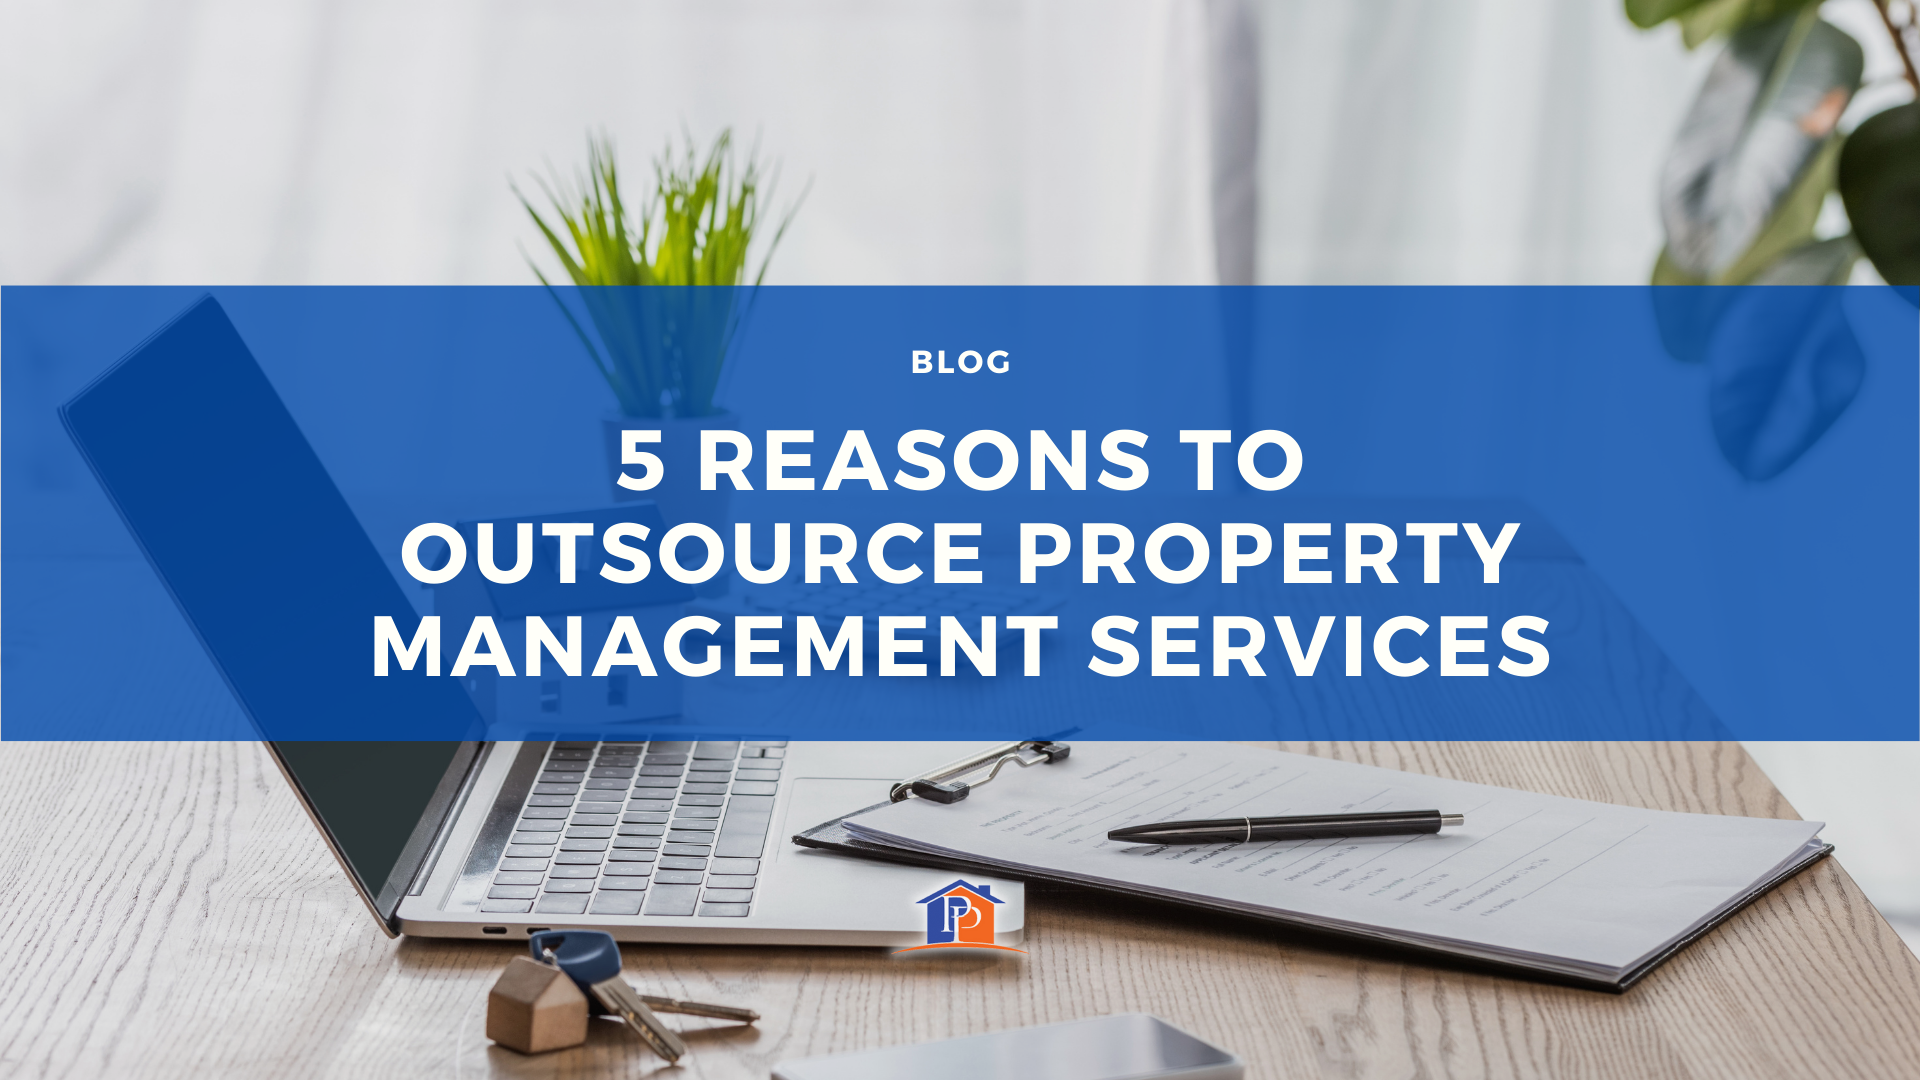 5 Reasons to Outsource Property Management Services